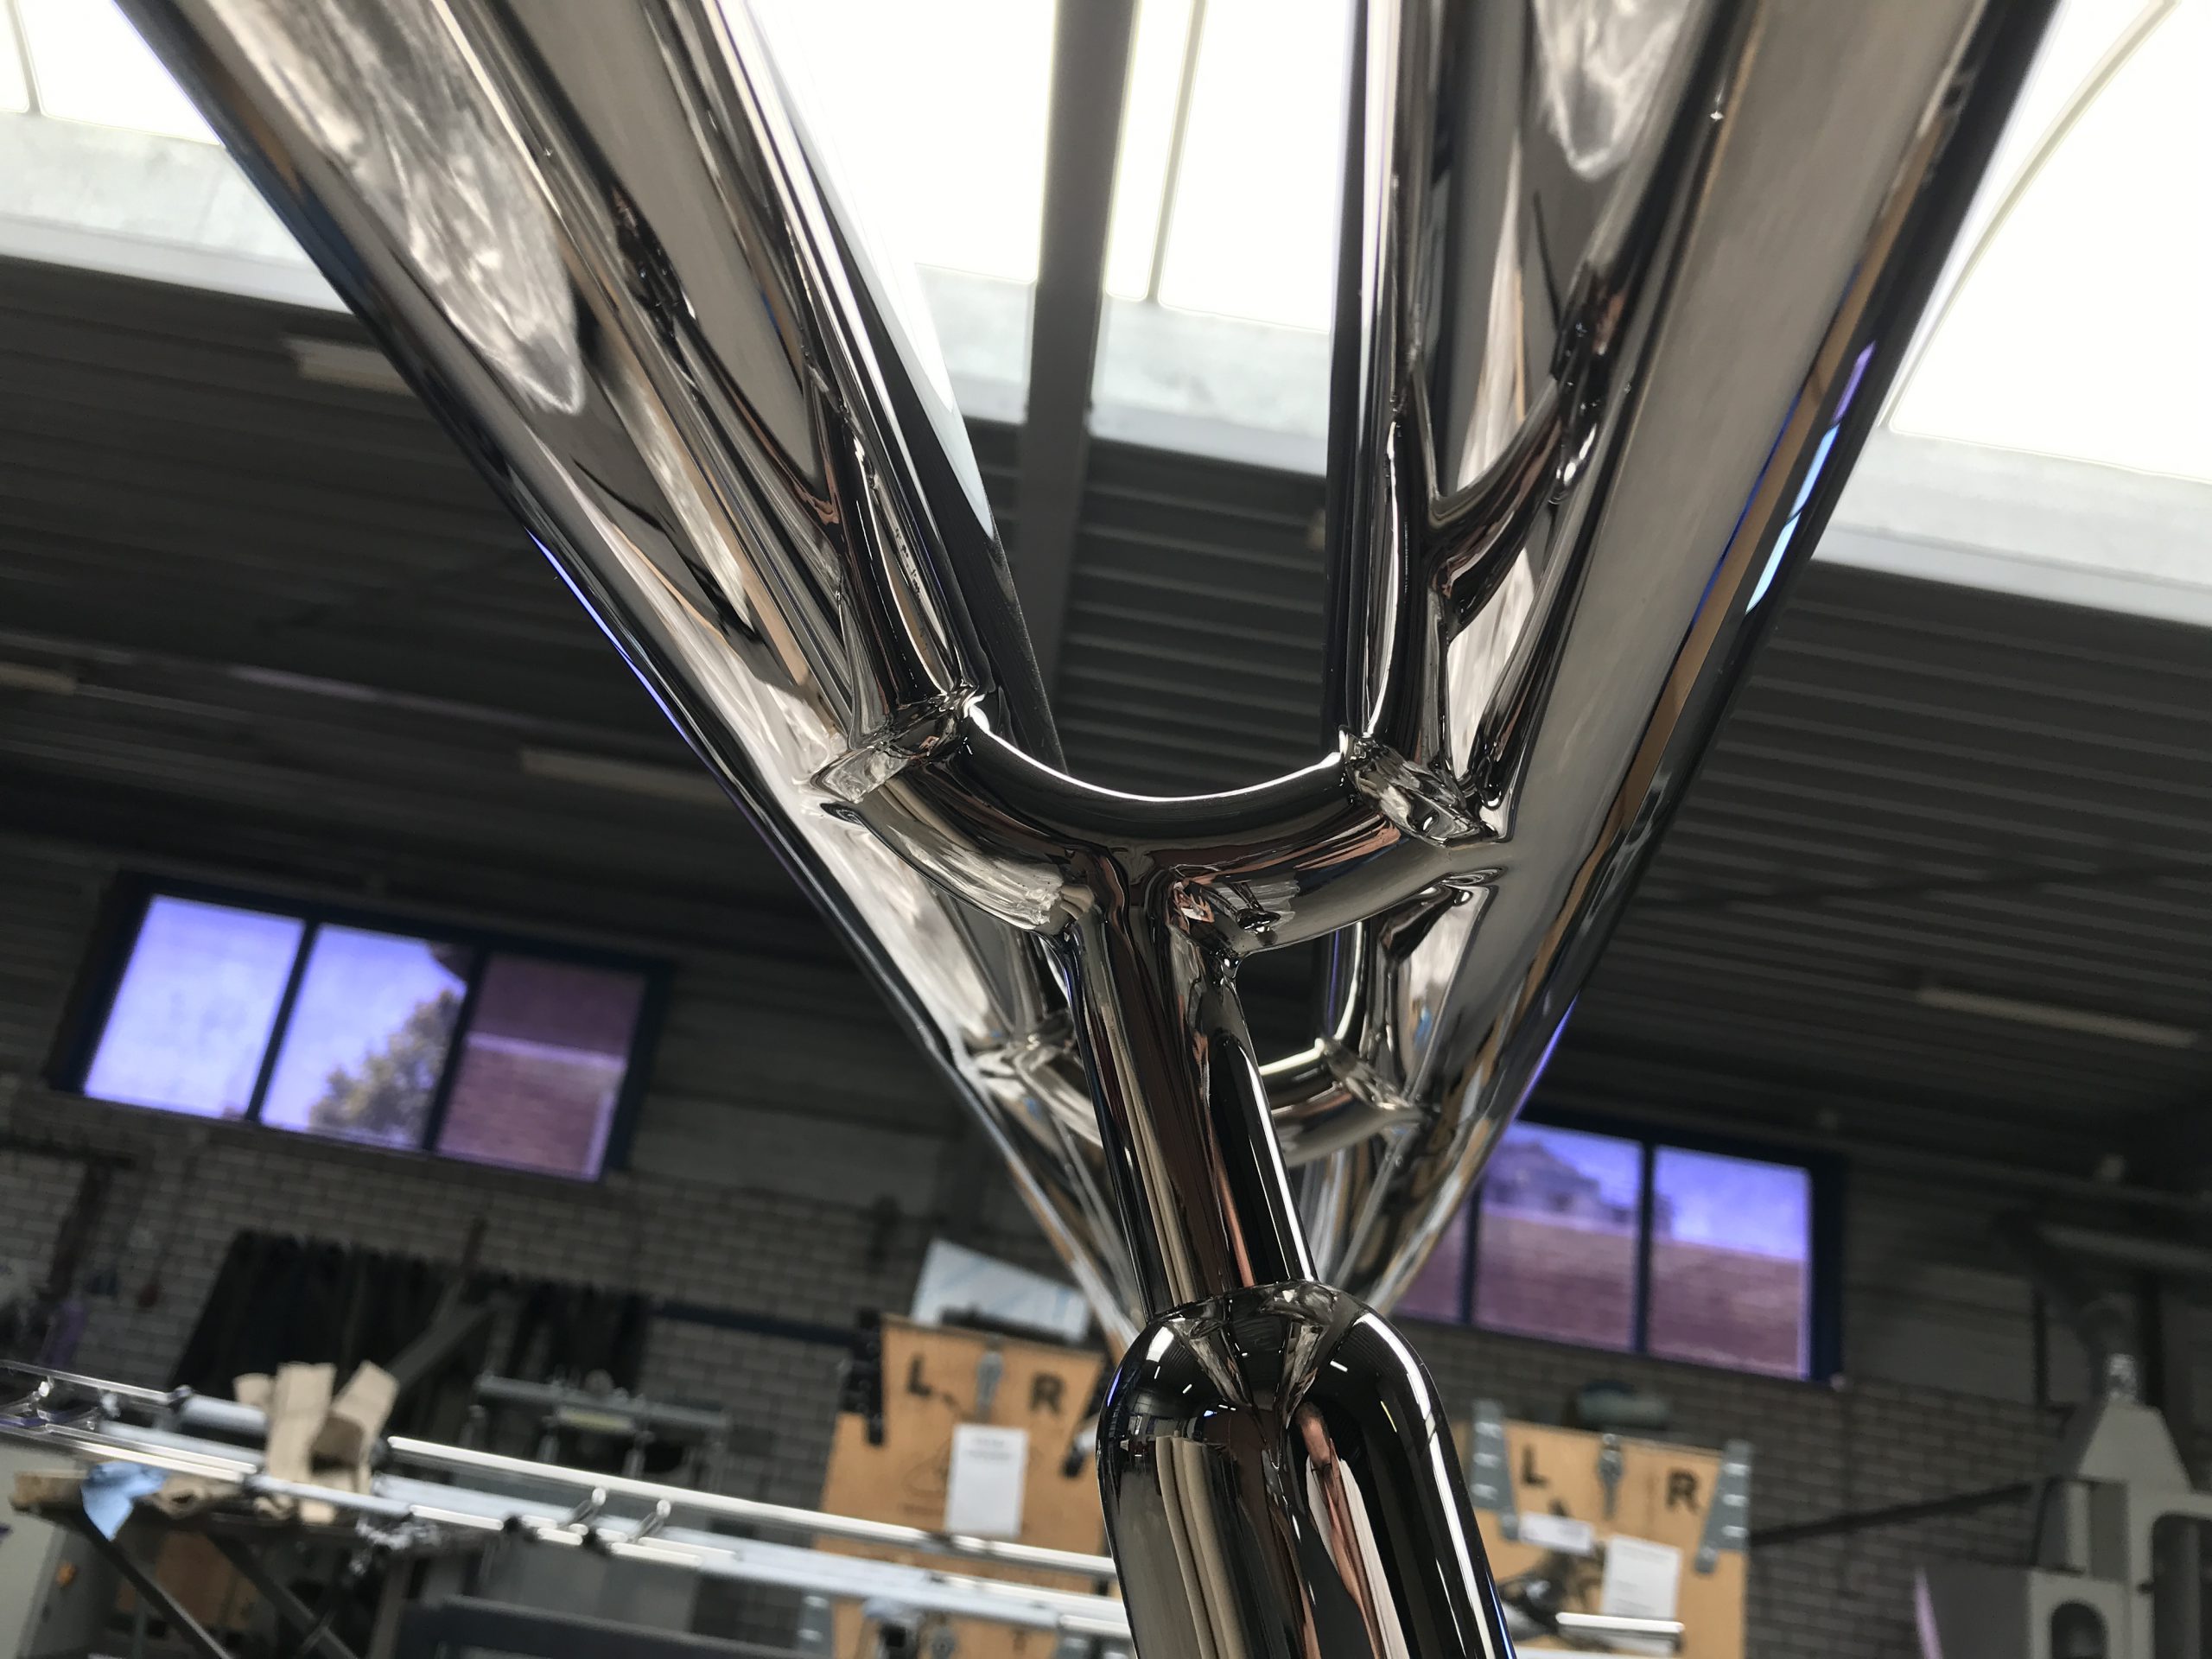 Handrail tube high-glos mirror polished stainless steel